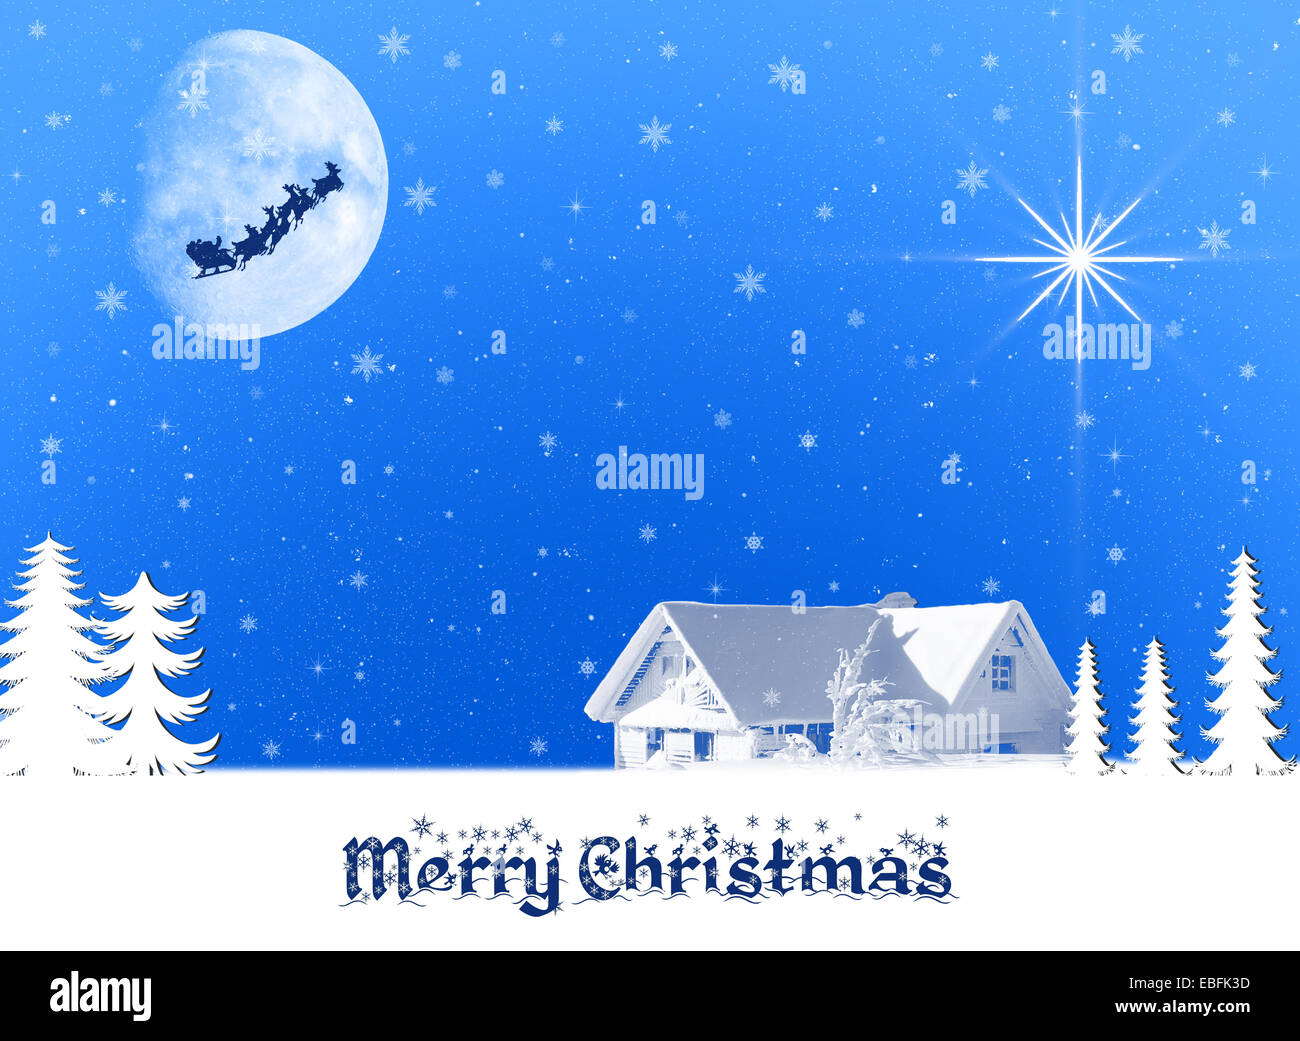 Christmas background, illustration with stars trees and a house Stock Photo